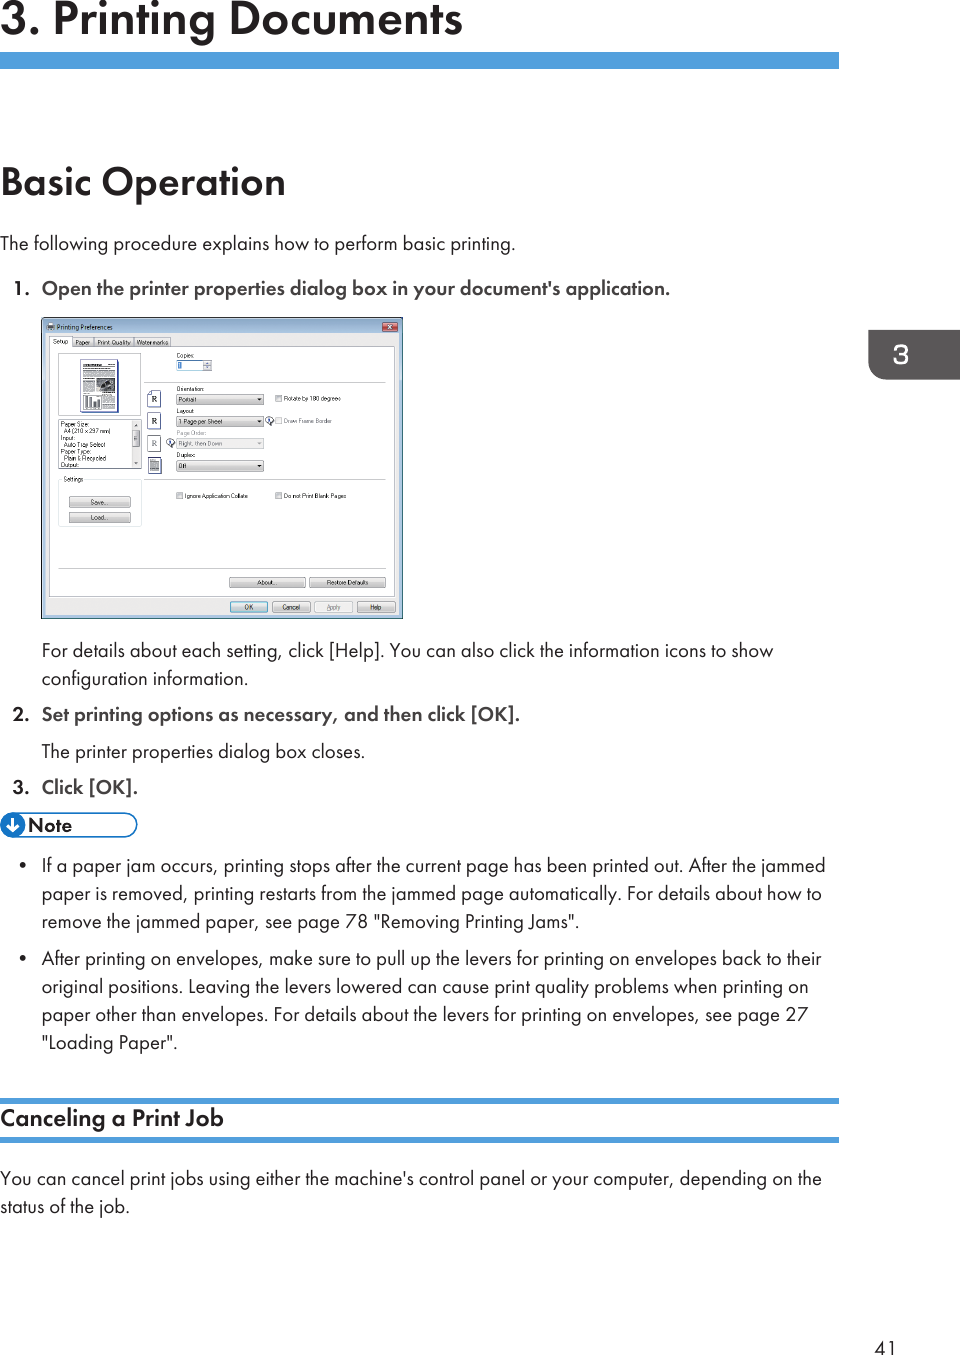 3. Printing DocumentsBasic OperationThe following procedure explains how to perform basic printing.1. Open the printer properties dialog box in your document&apos;s application.For details about each setting, click [Help]. You can also click the information icons to showconfiguration information.2. Set printing options as necessary, and then click [OK].The printer properties dialog box closes.3. Click [OK].• If a paper jam occurs, printing stops after the current page has been printed out. After the jammedpaper is removed, printing restarts from the jammed page automatically. For details about how toremove the jammed paper, see page 78 &quot;Removing Printing Jams&quot;.•After printing on envelopes, make sure to pull up the levers for printing on envelopes back to theiroriginal positions. Leaving the levers lowered can cause print quality problems when printing onpaper other than envelopes. For details about the levers for printing on envelopes, see page 27&quot;Loading Paper&quot;.Canceling a Print JobYou can cancel print jobs using either the machine&apos;s control panel or your computer, depending on thestatus of the job.41